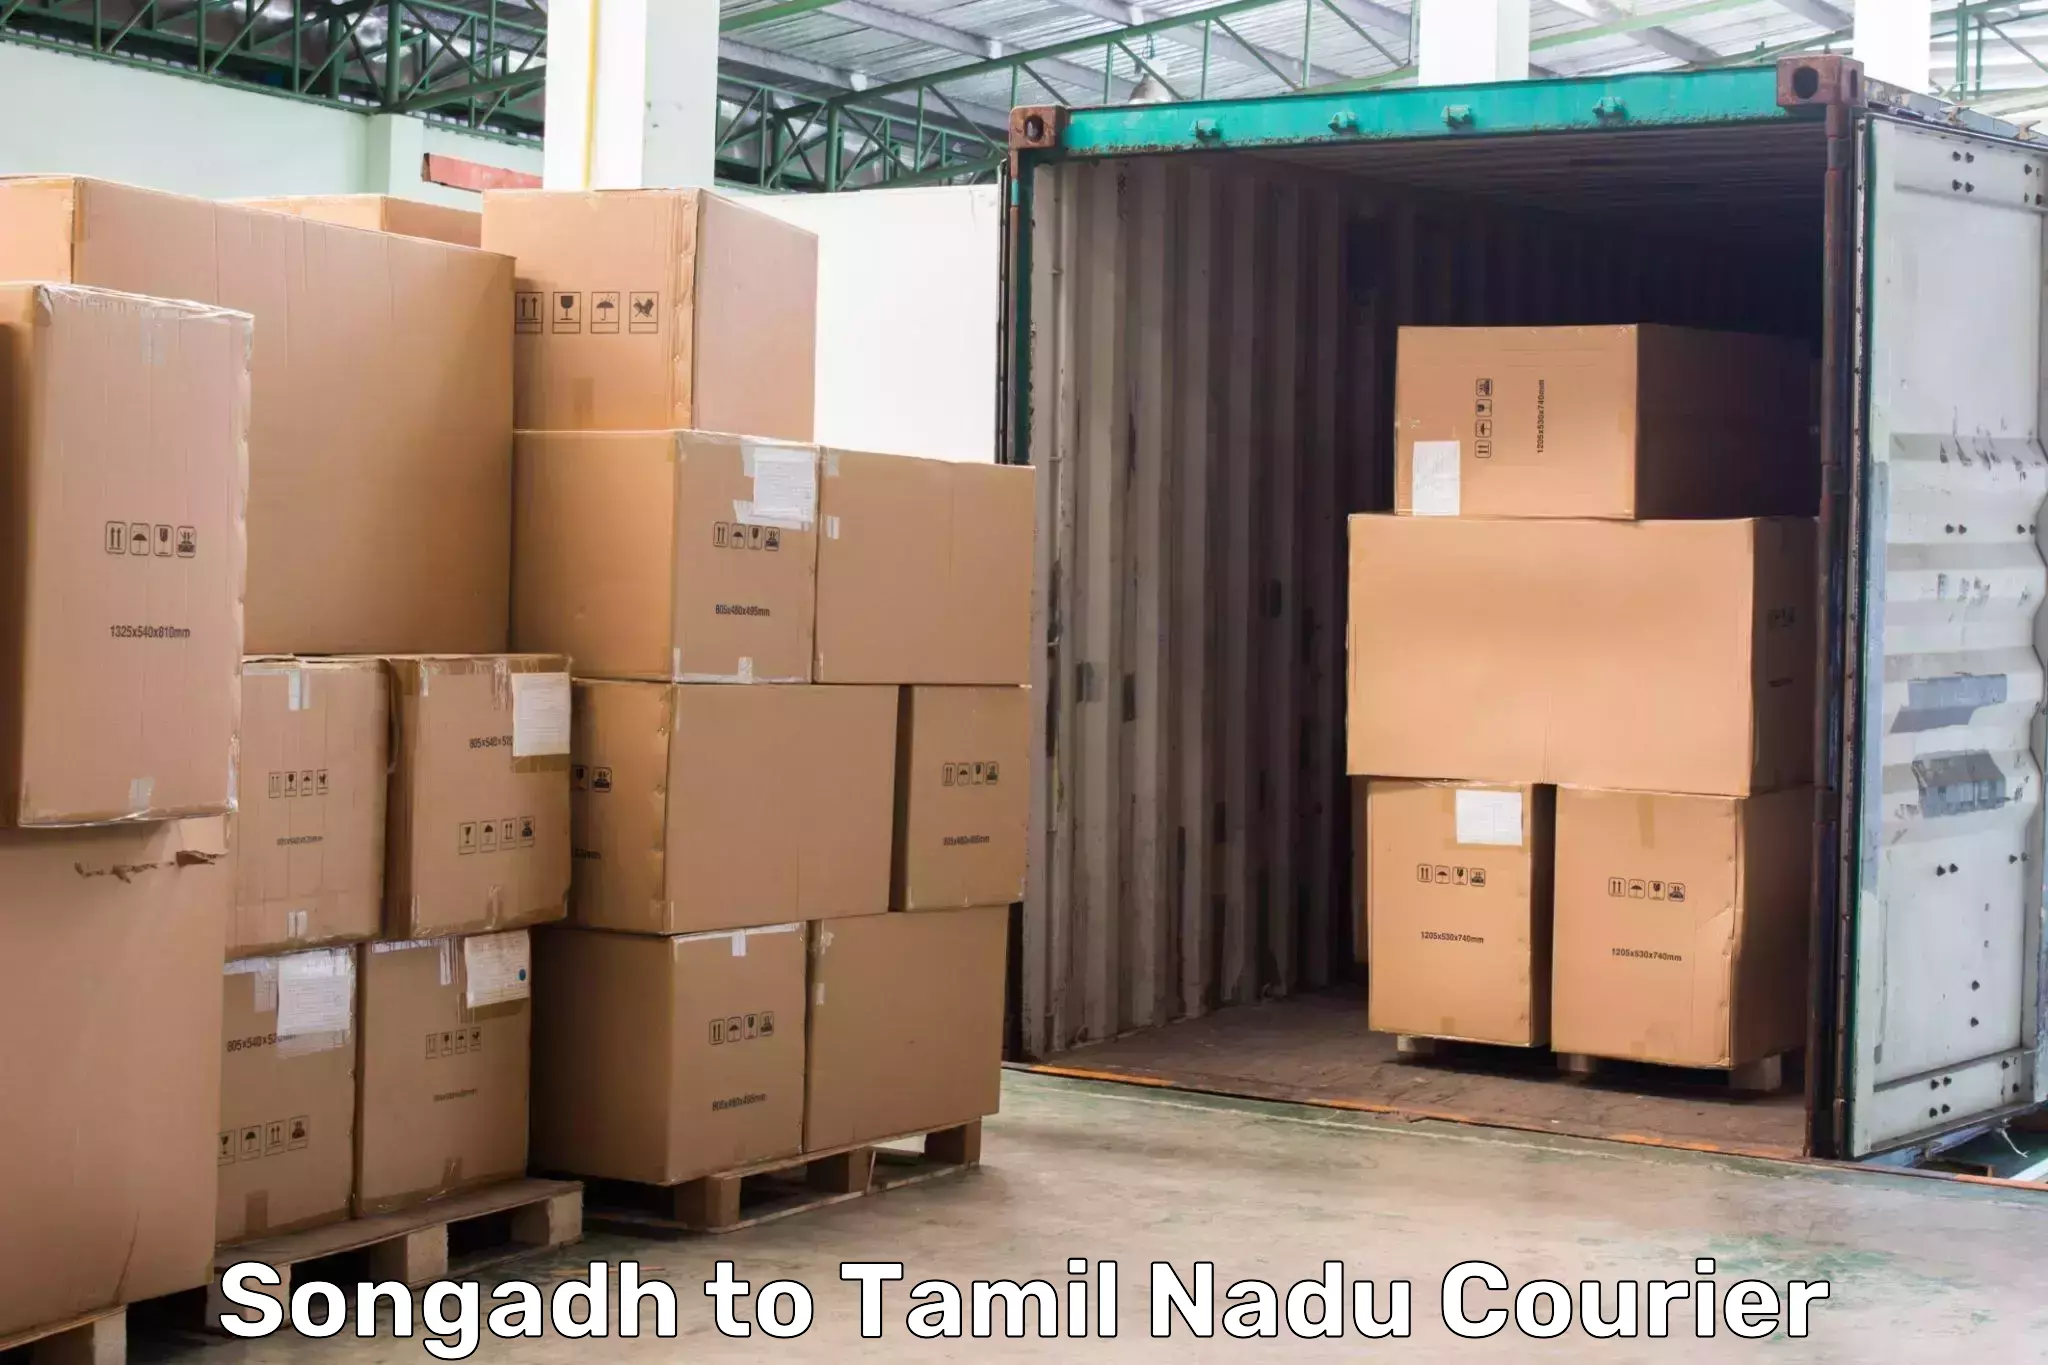 Overnight delivery services Songadh to Thondi